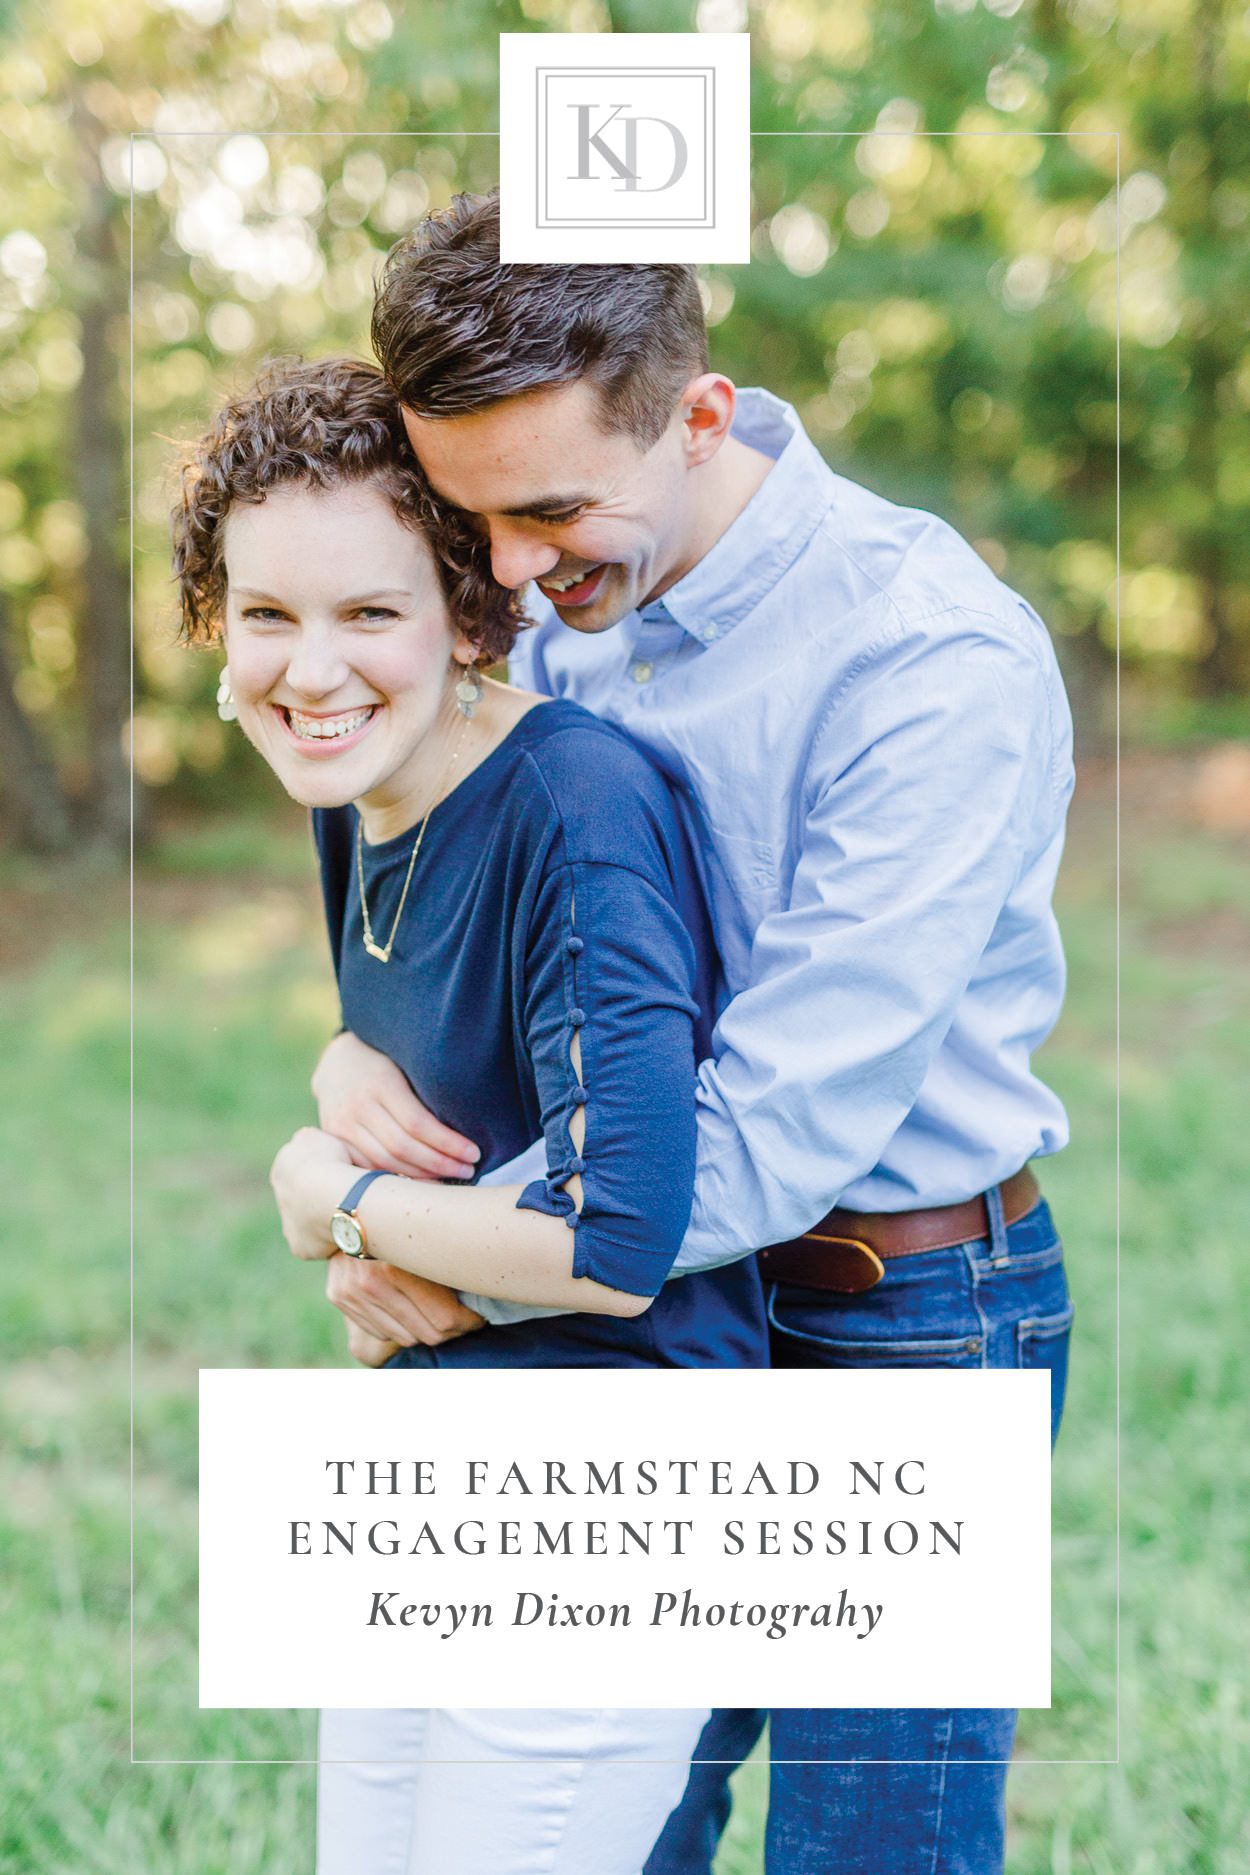 The Farmstead NC Engagement Session